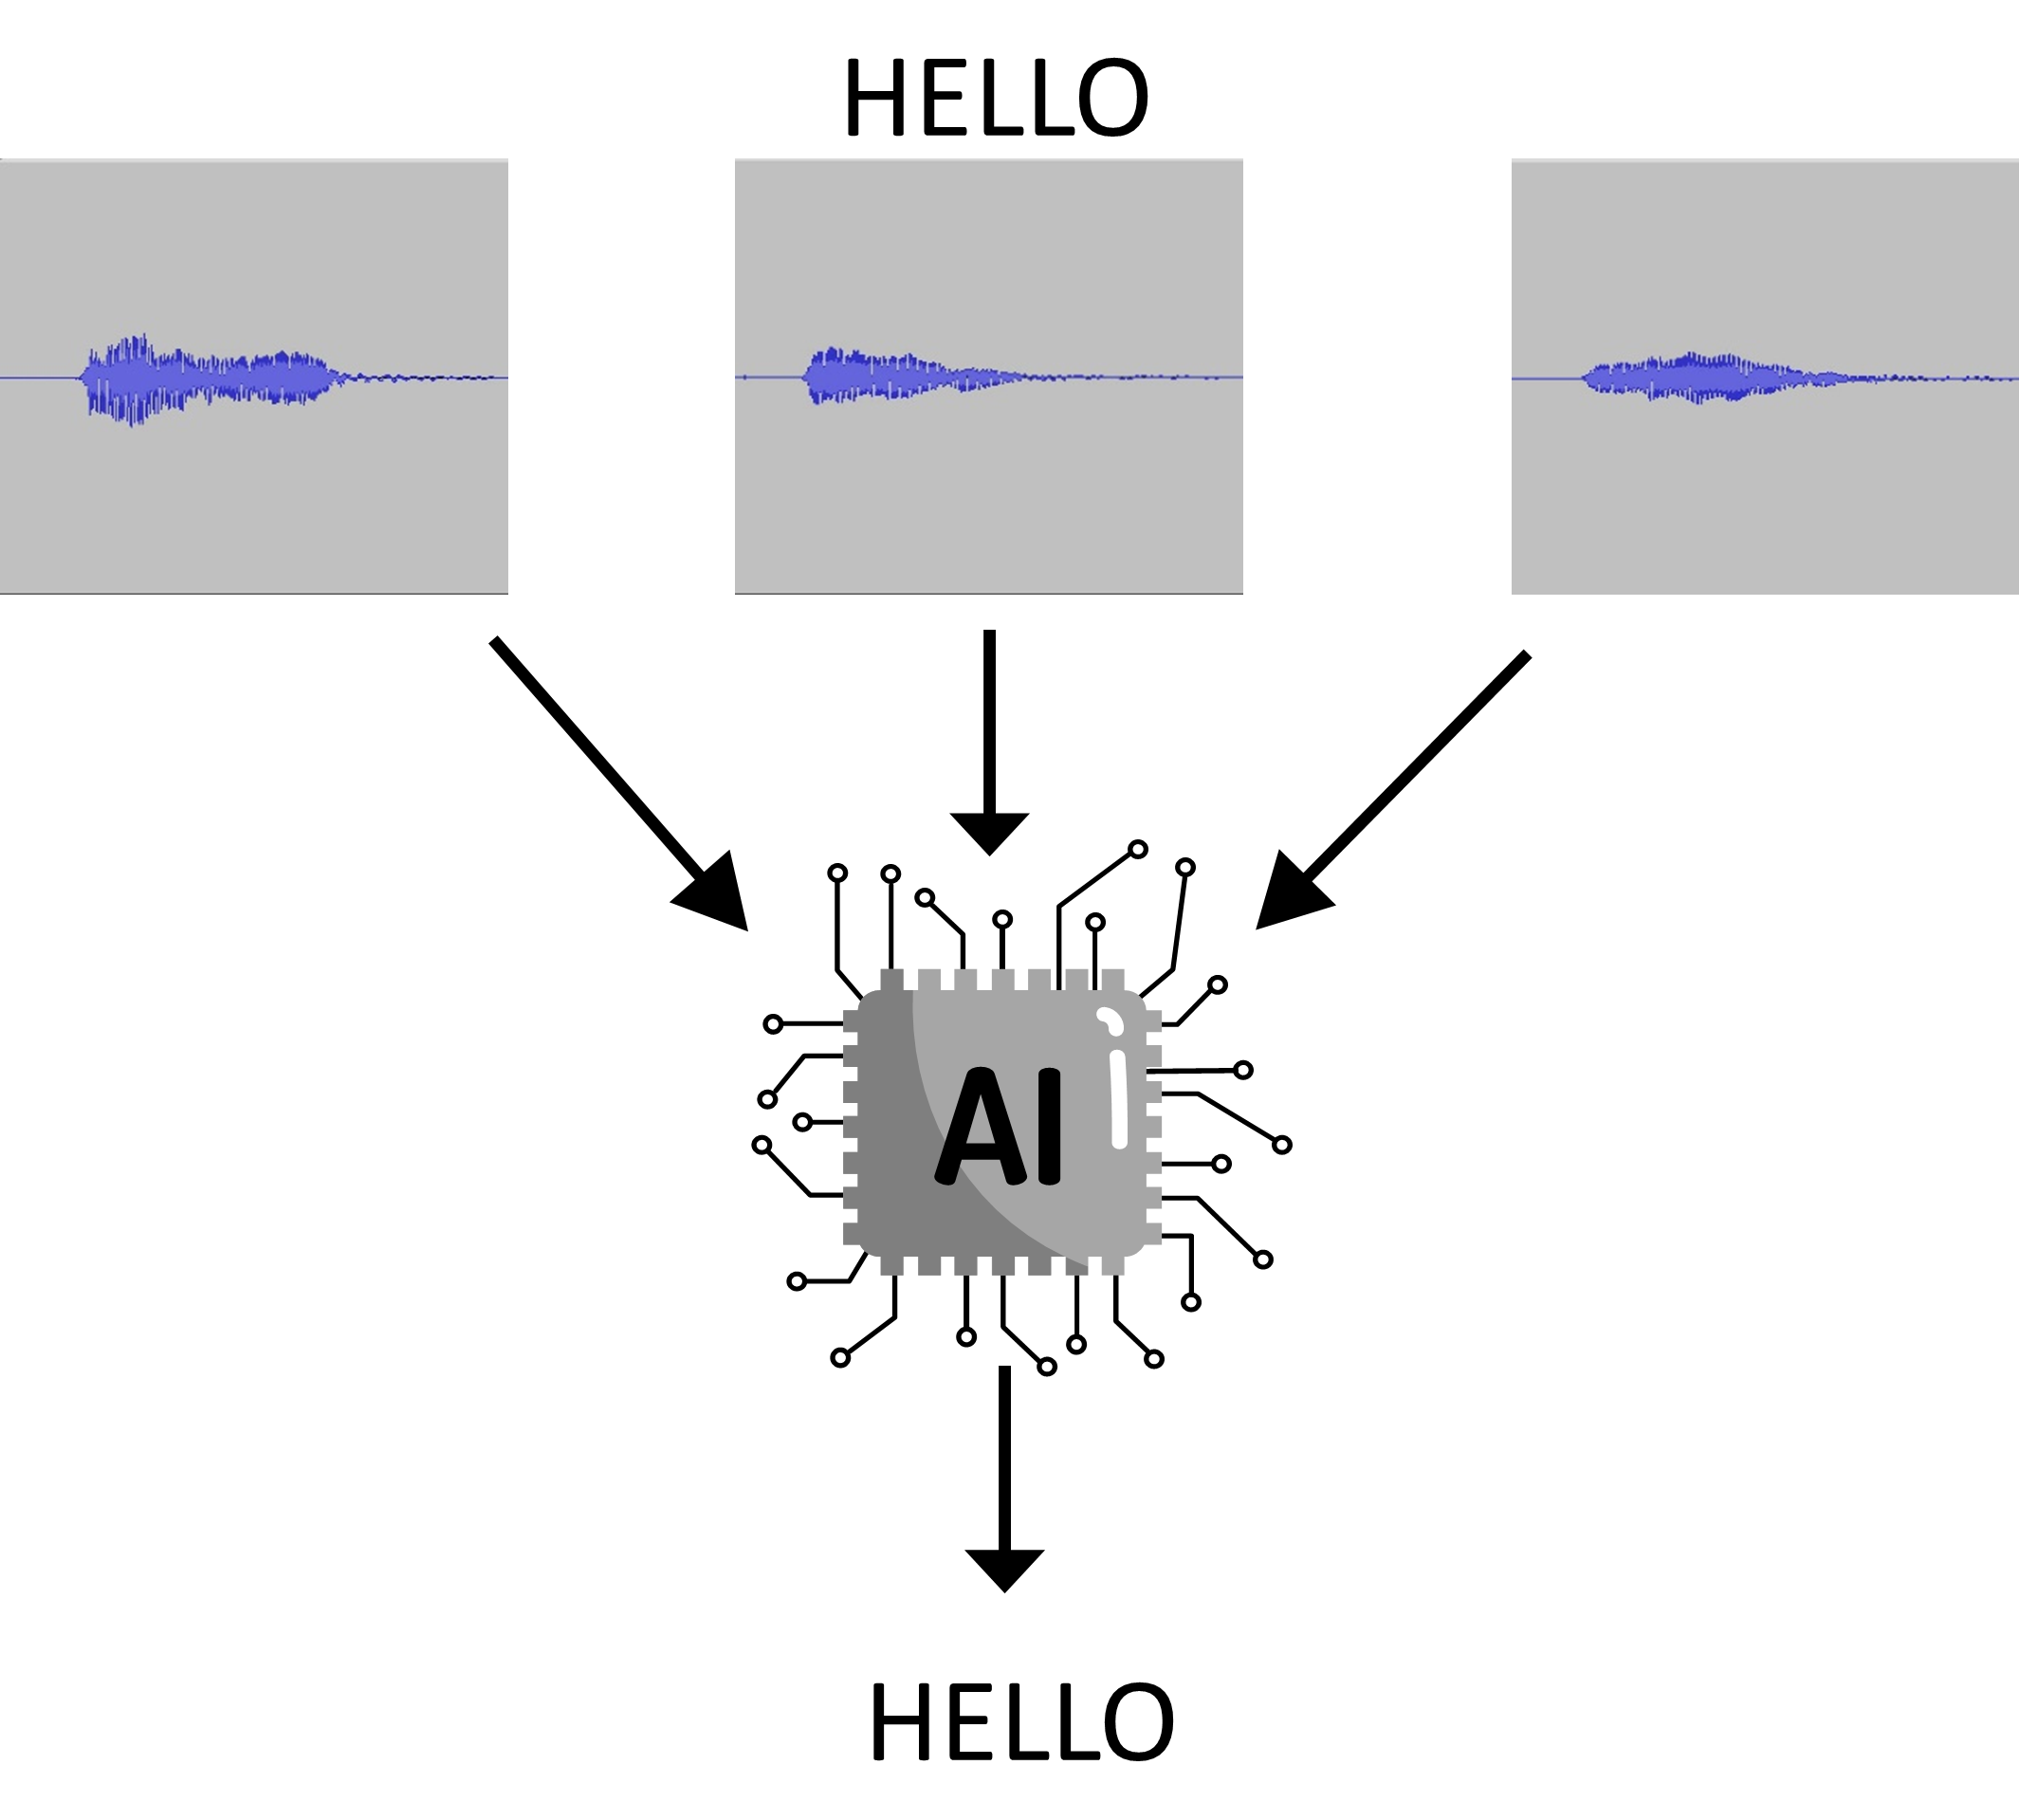 three different looking wave signals, all representing the word "hello", are classified by an AI as instances of the word "hello"